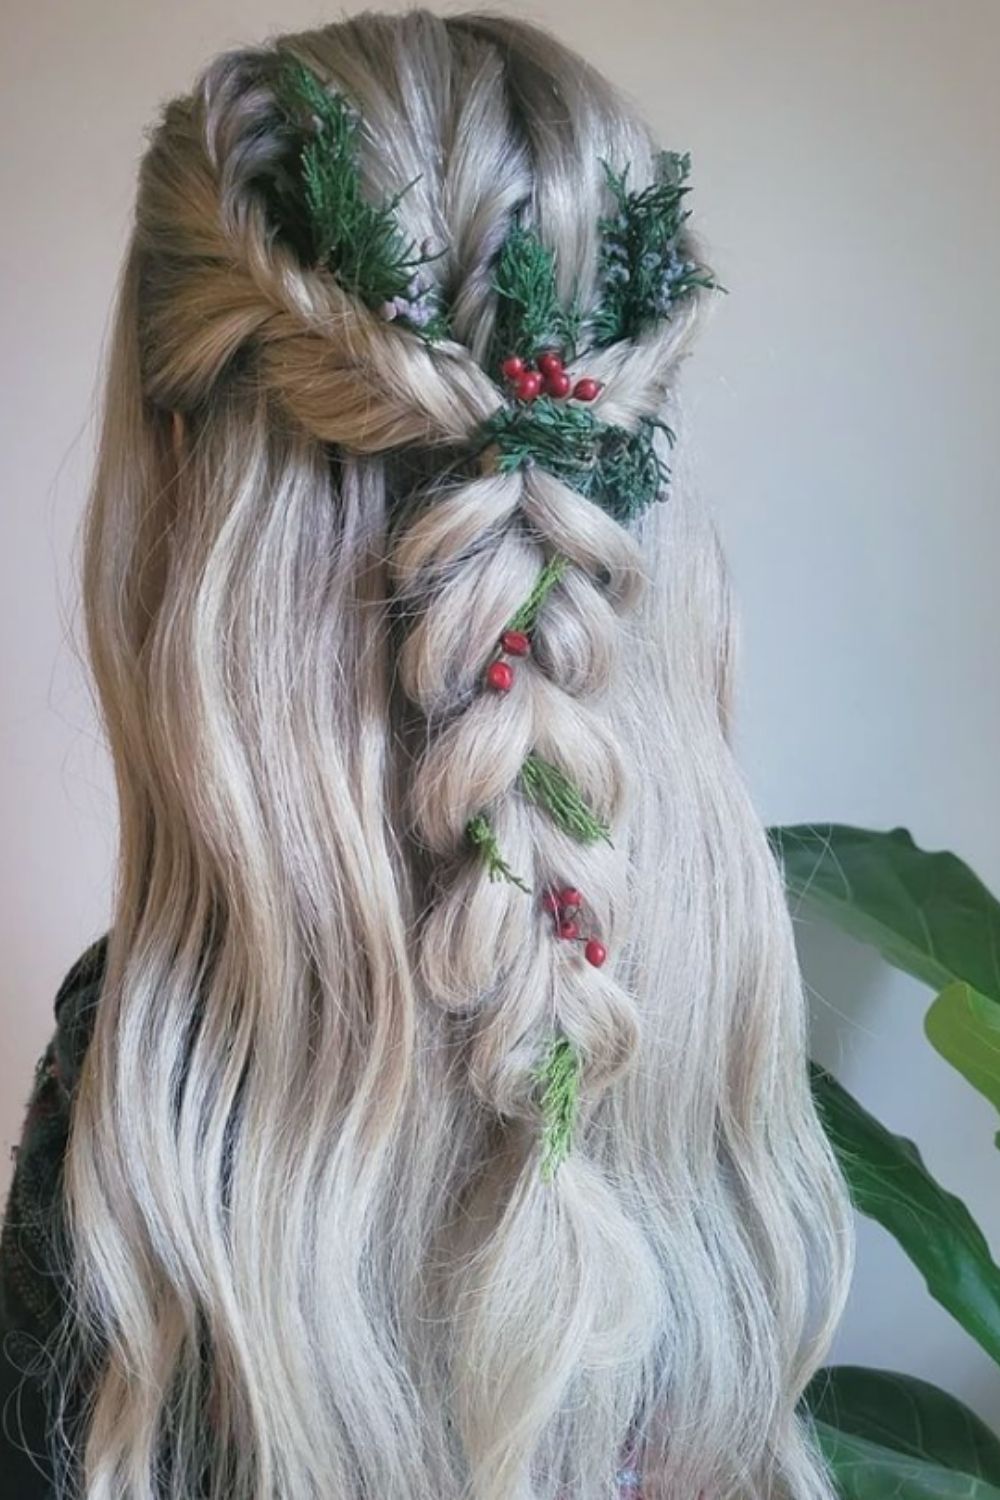 Grey, red and green hair color styles into tree ornaments.